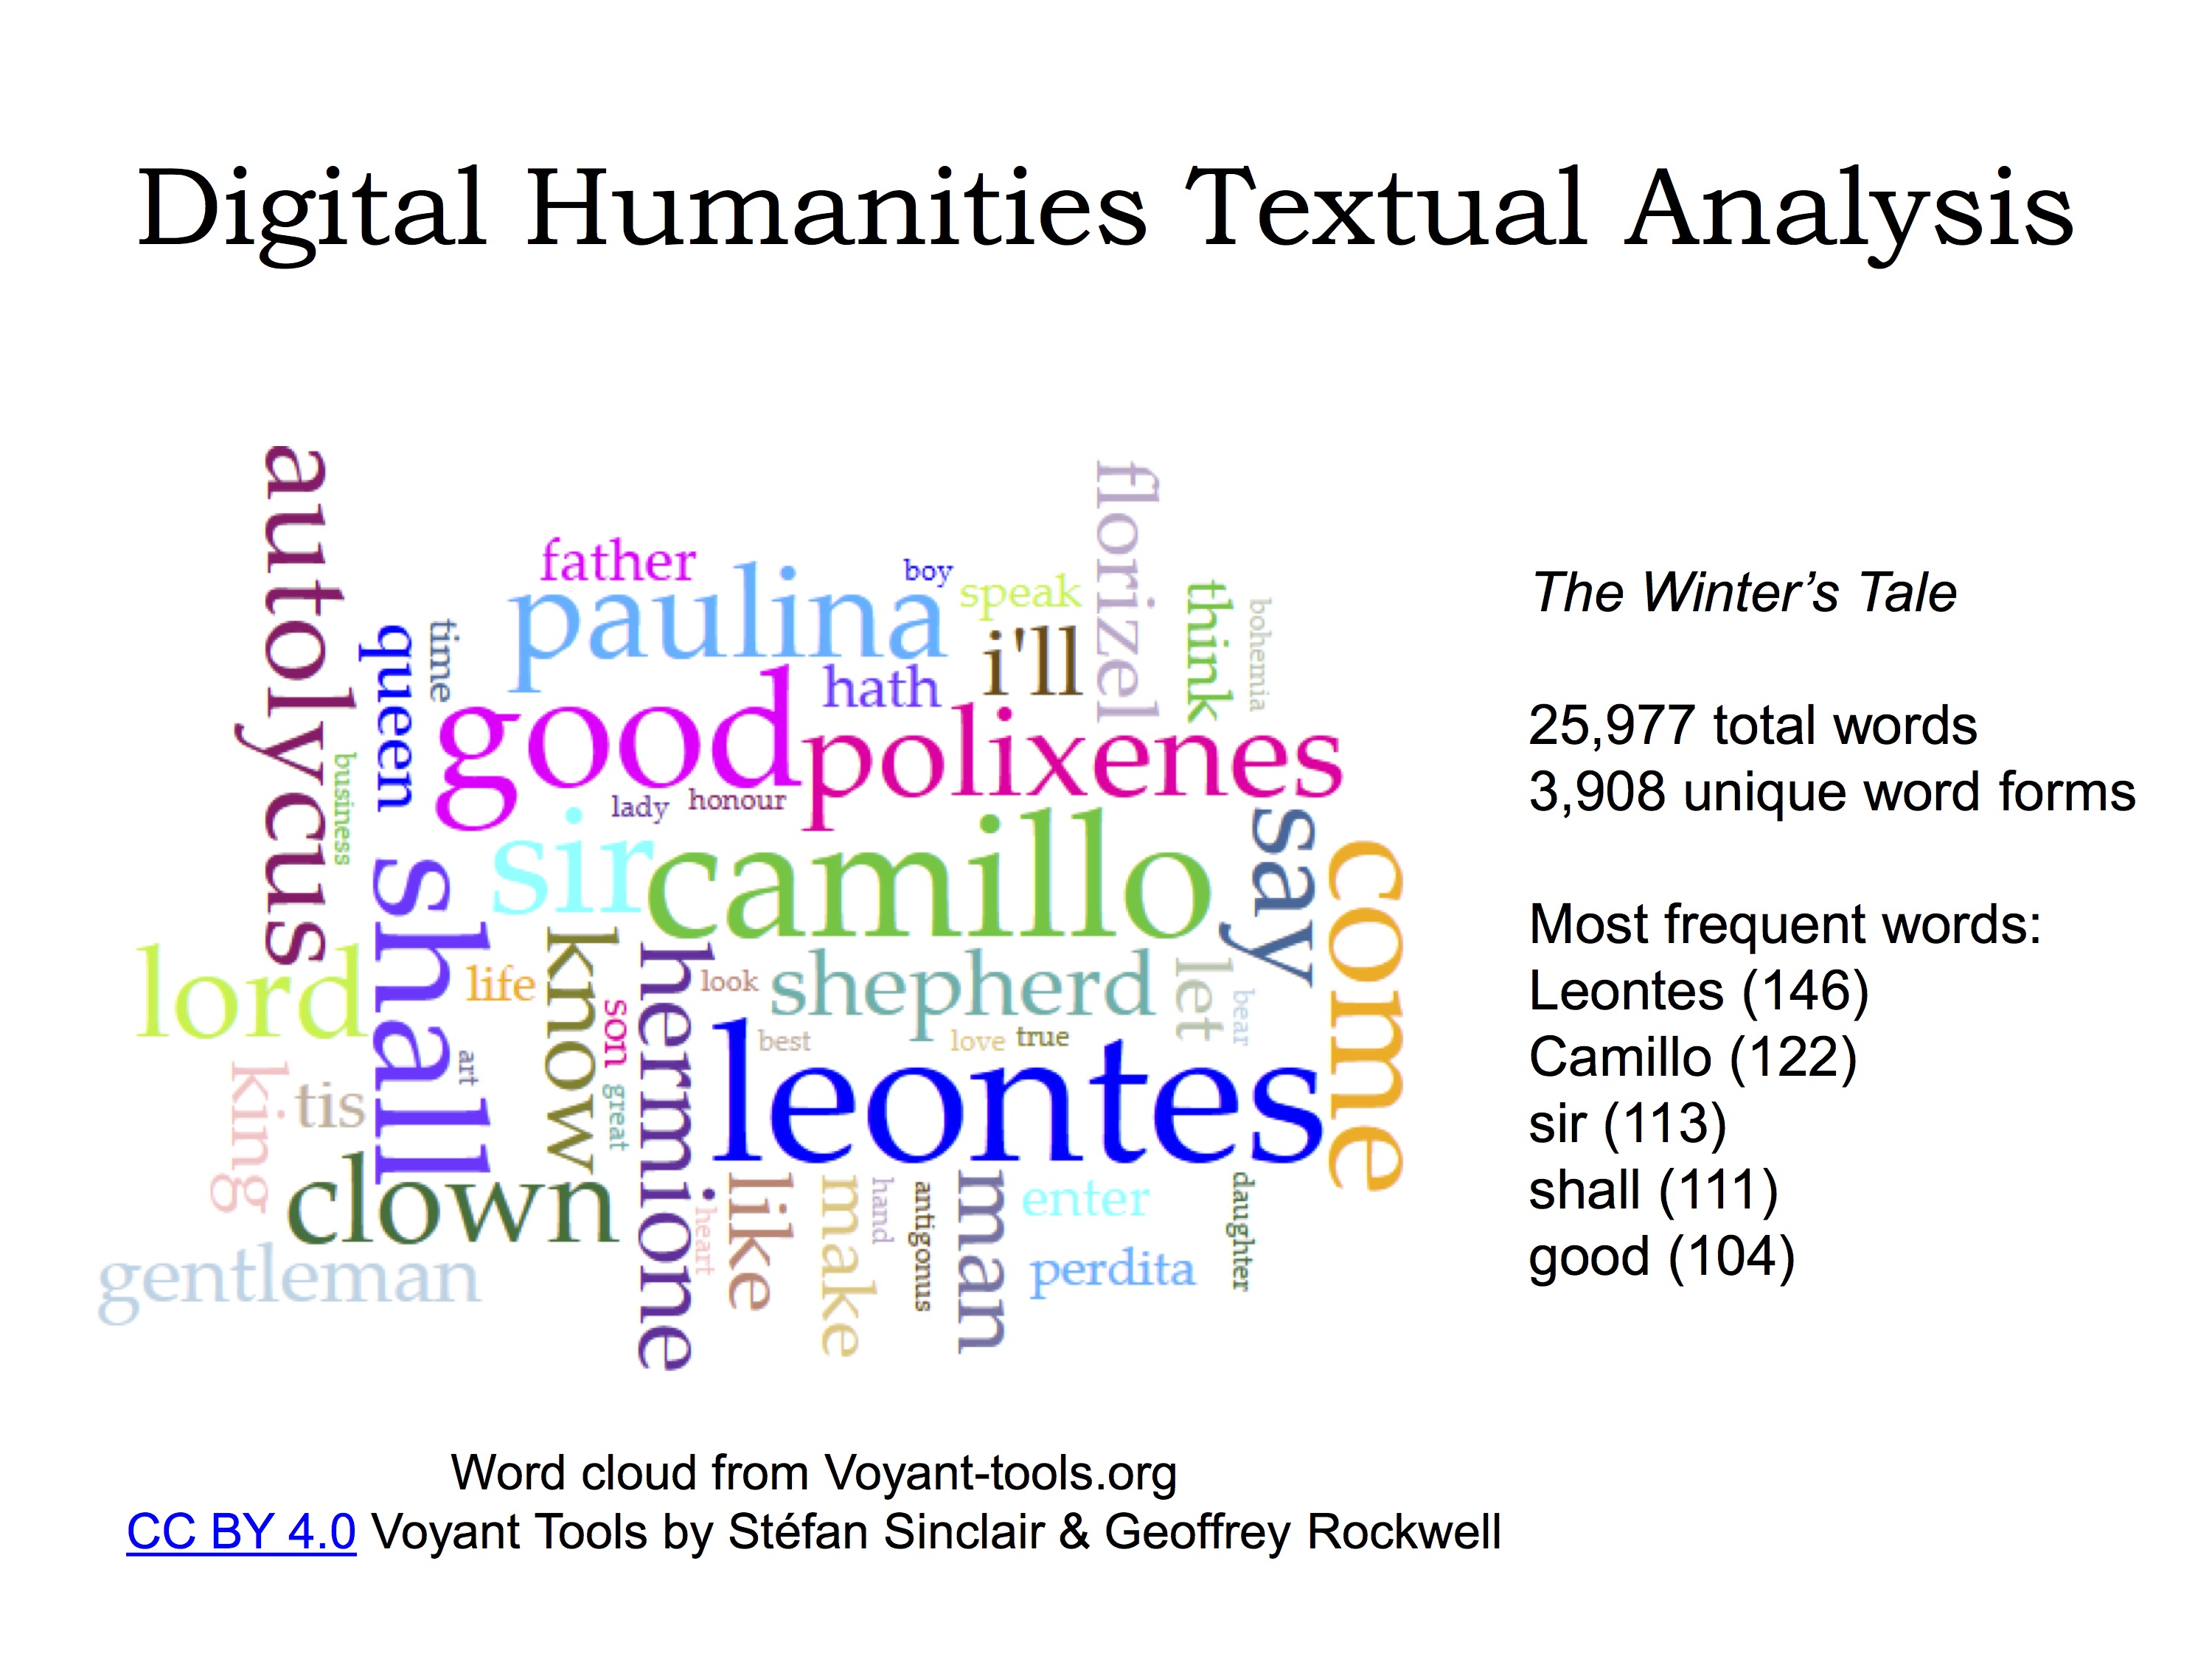 Digital humanities textual analysis using Shakespeare and Voyant Tools